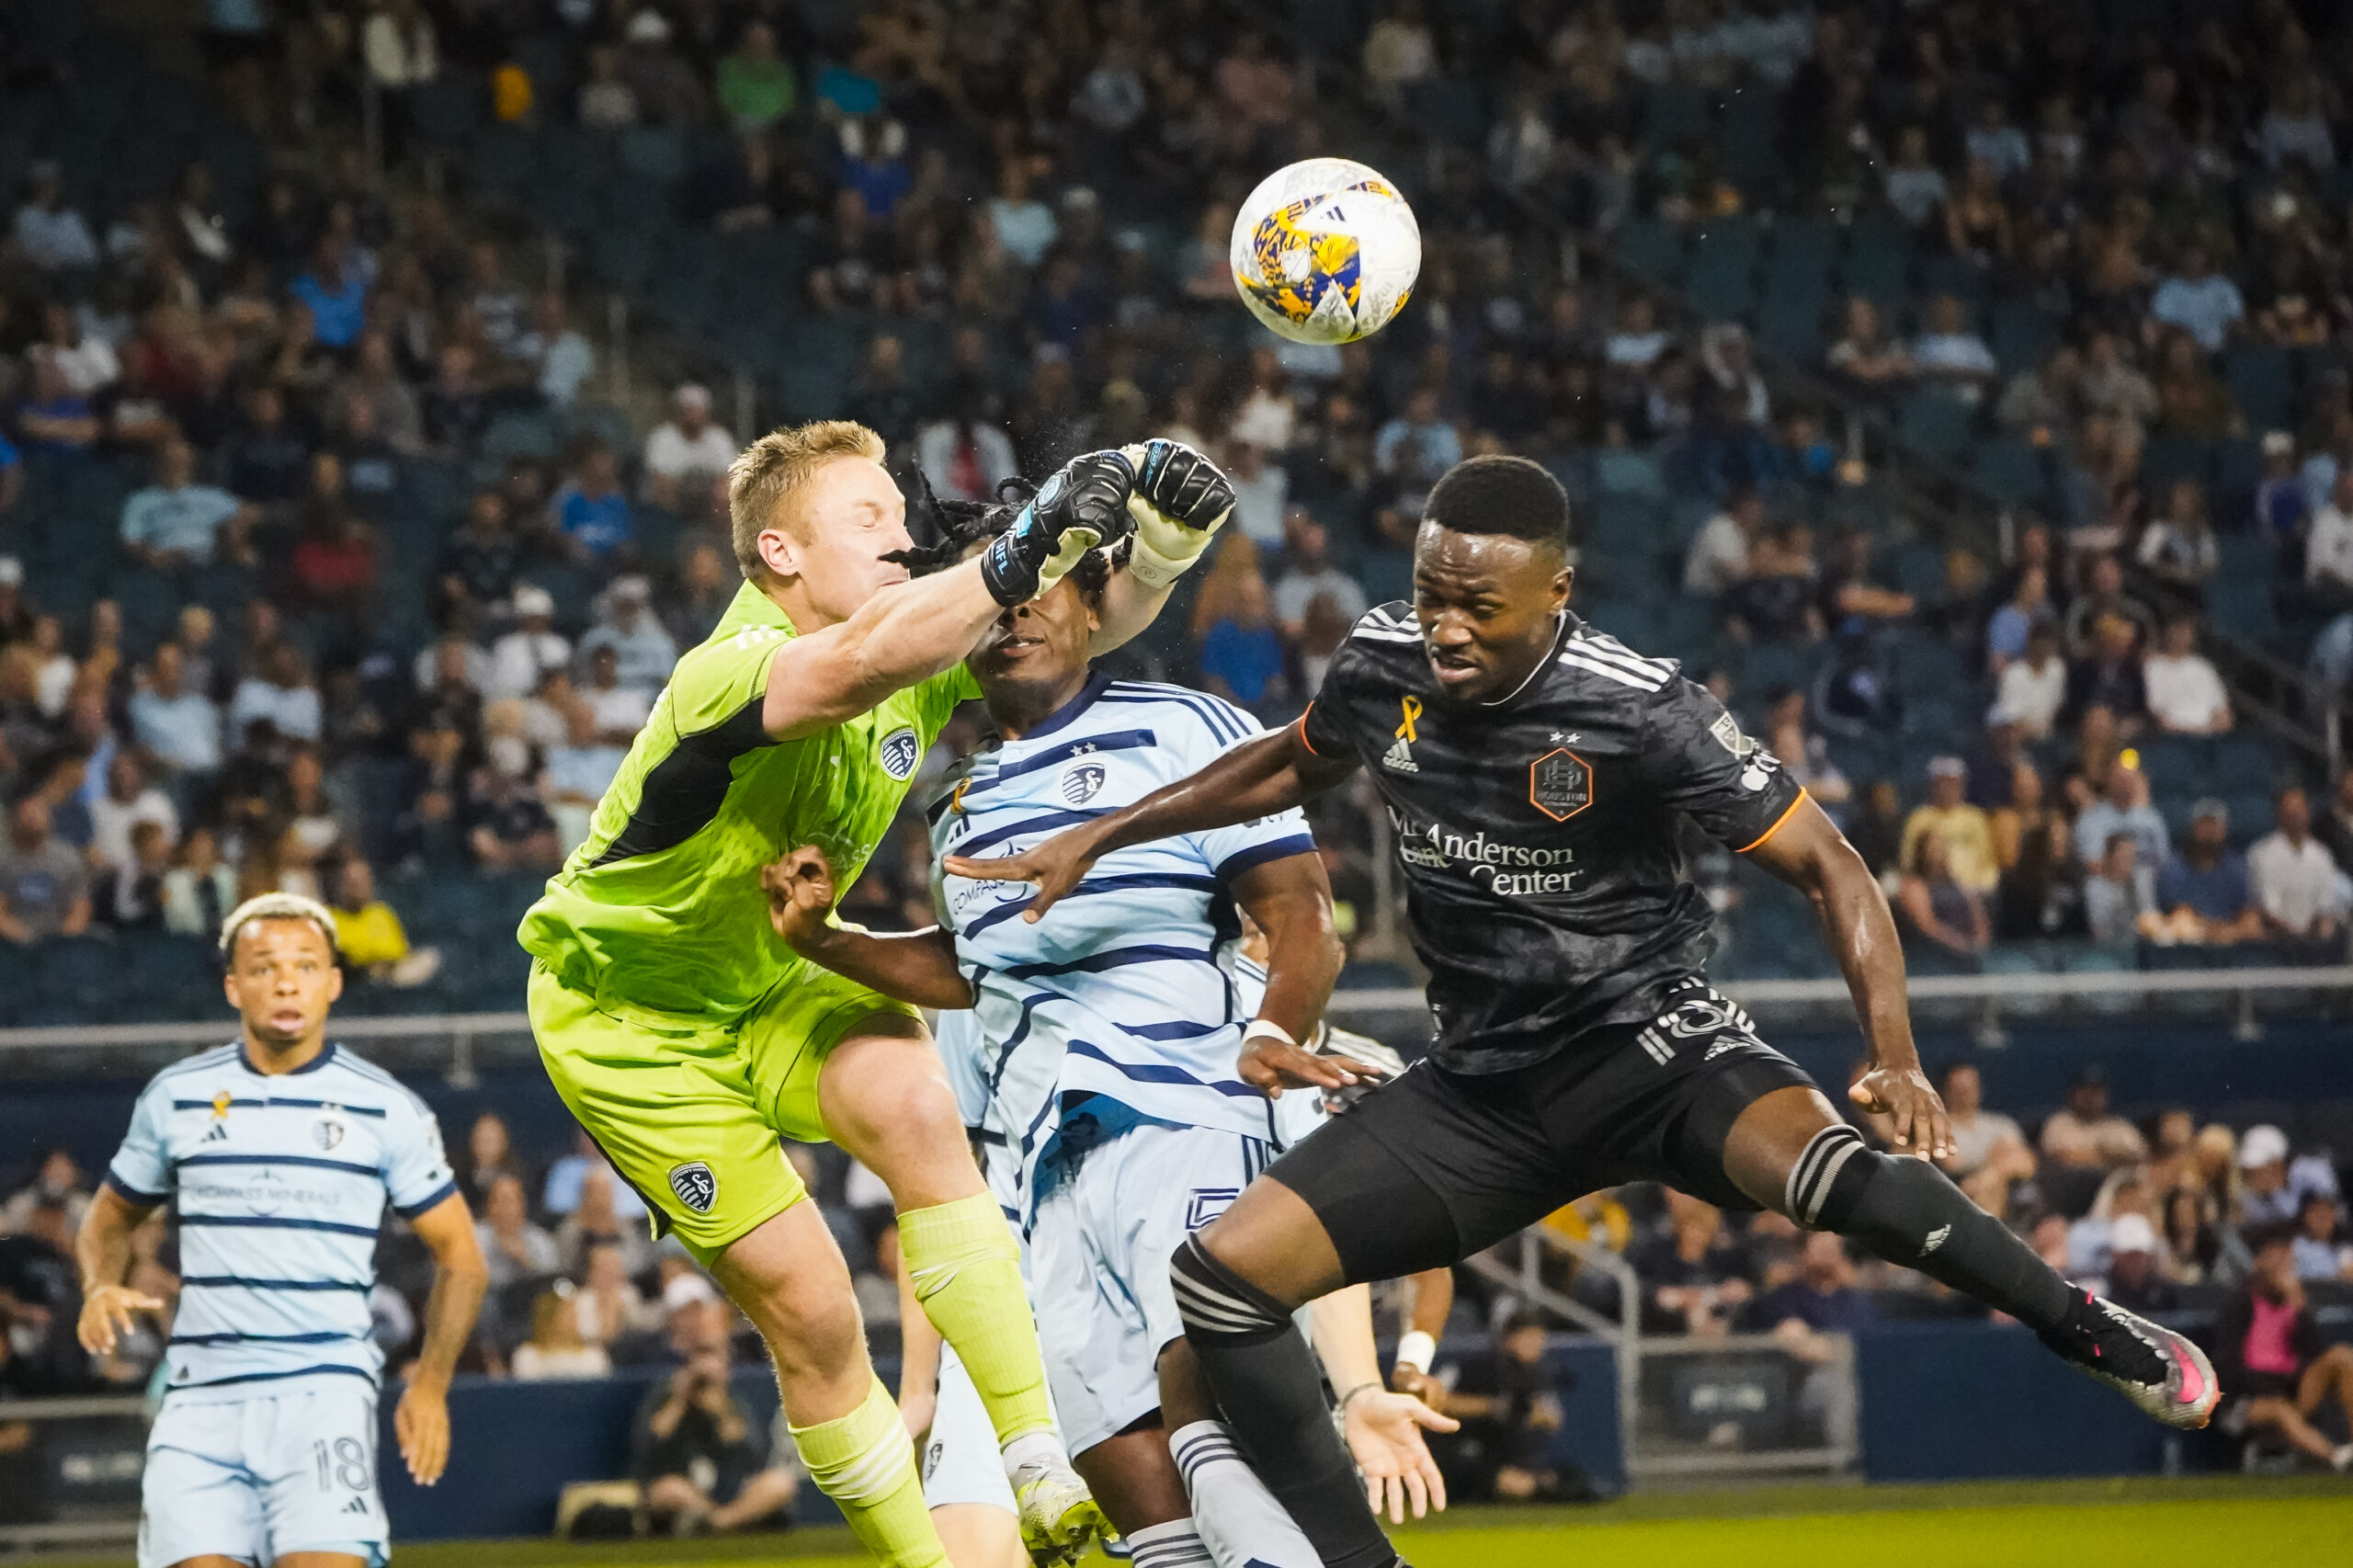 Sporting KC announced as one of eight MLS teams participating in